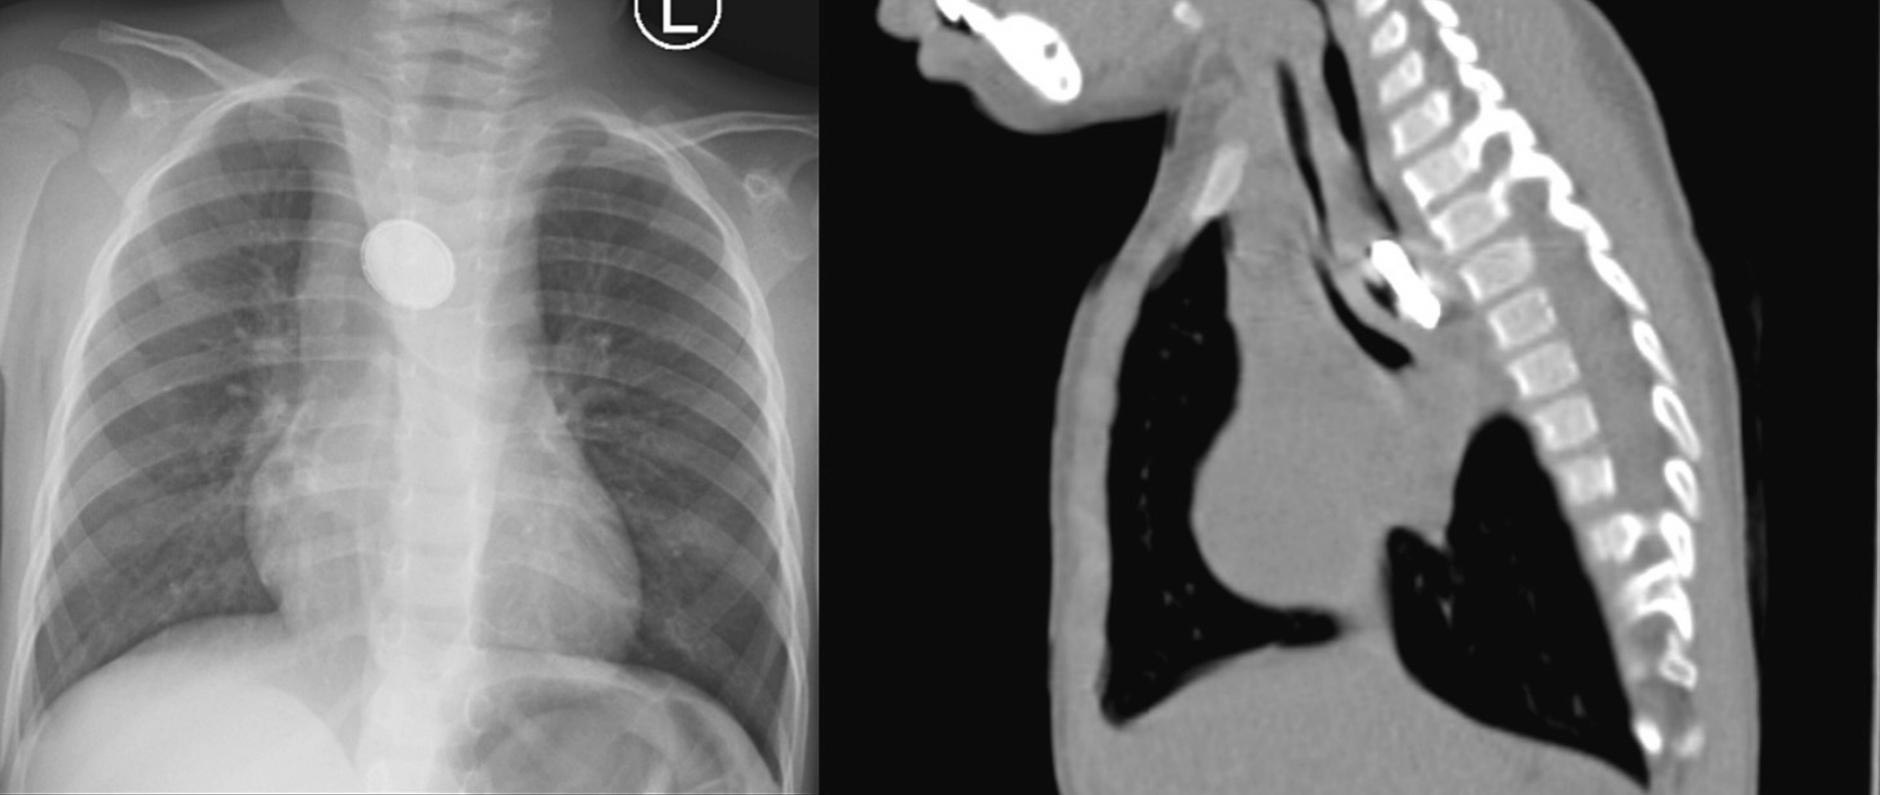 Posteroanterior chest x-ray and sagittal view of the thoracic CT revealing a foreign body in the thoracic esophagus